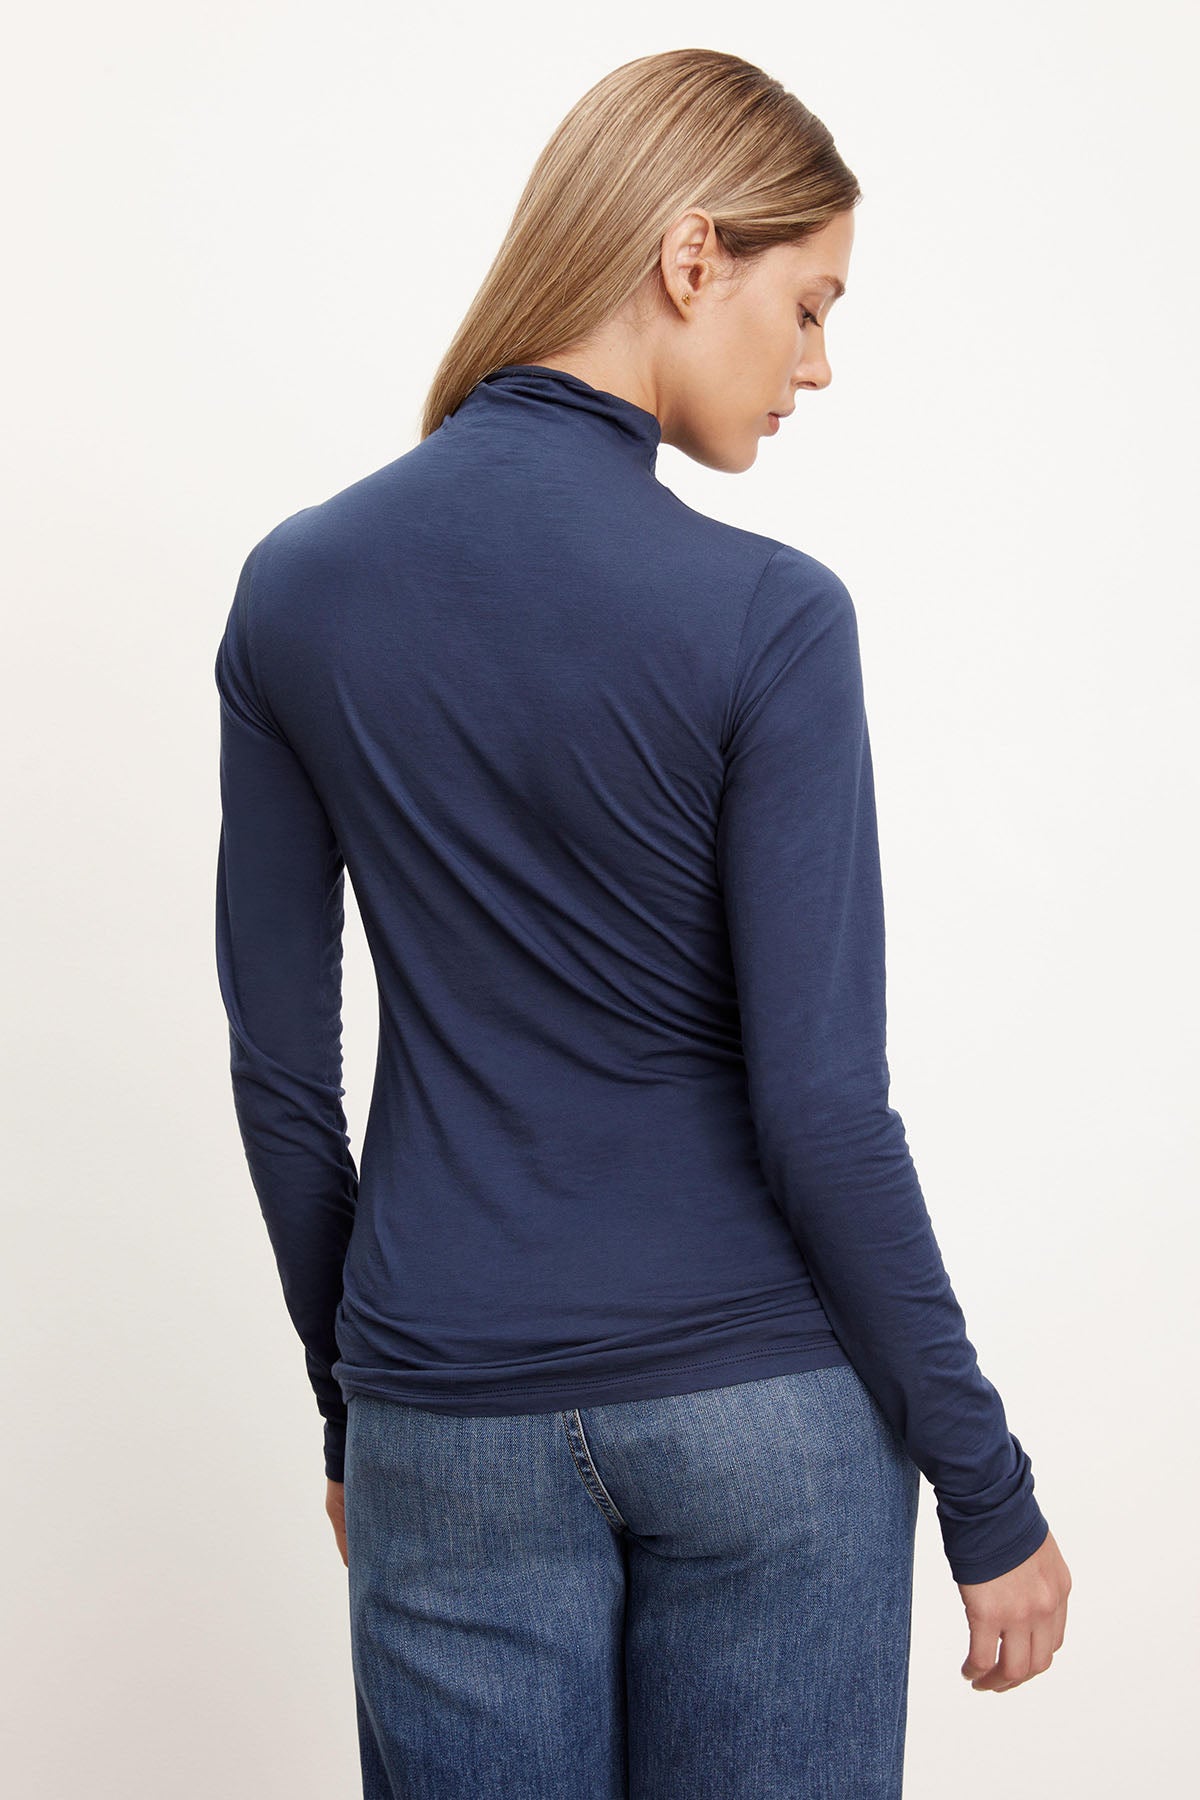 The back view of a woman sporting a fashionable outfit with jeans and the Velvet by Graham & Spencer TALISIA GAUZY WHISPER FITTED MOCK NECK TEE, making it a versatile wardrobe staple.-26895434285249